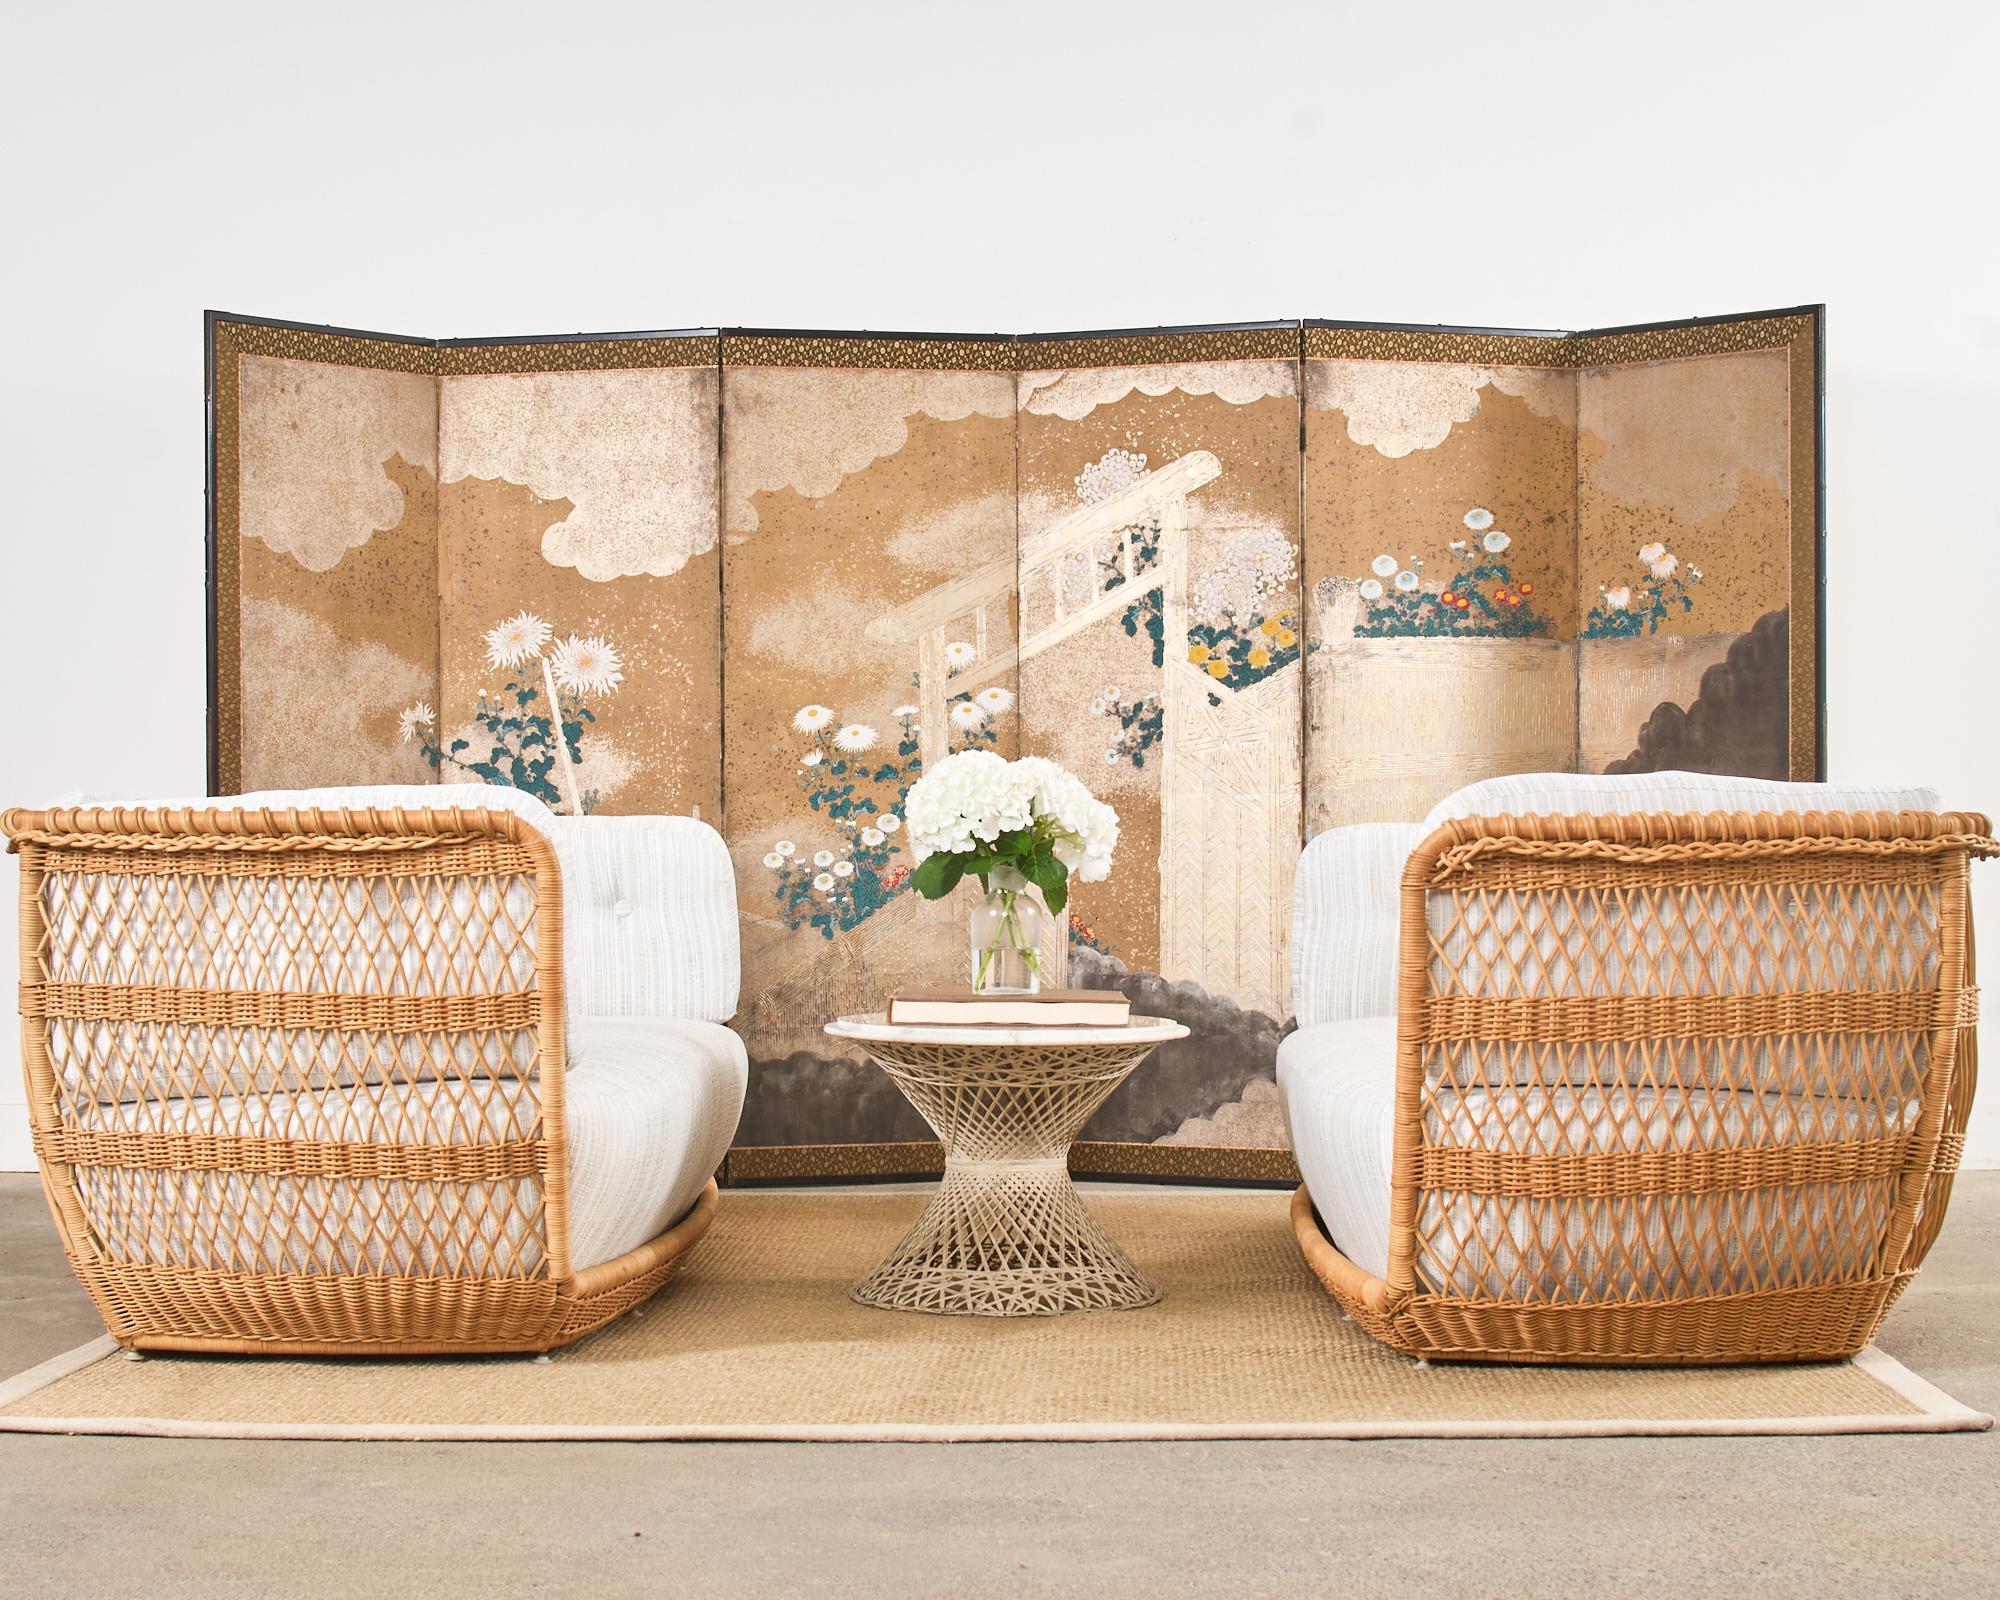 Gorgeous Japanese early 20th century Meiji period six-panel byobu screen featuring a brushwood gate and fence with flowering chrysanthemums. The large screen is crafted with ink and vibrant natural color pigments on mulberry paper. The screen is